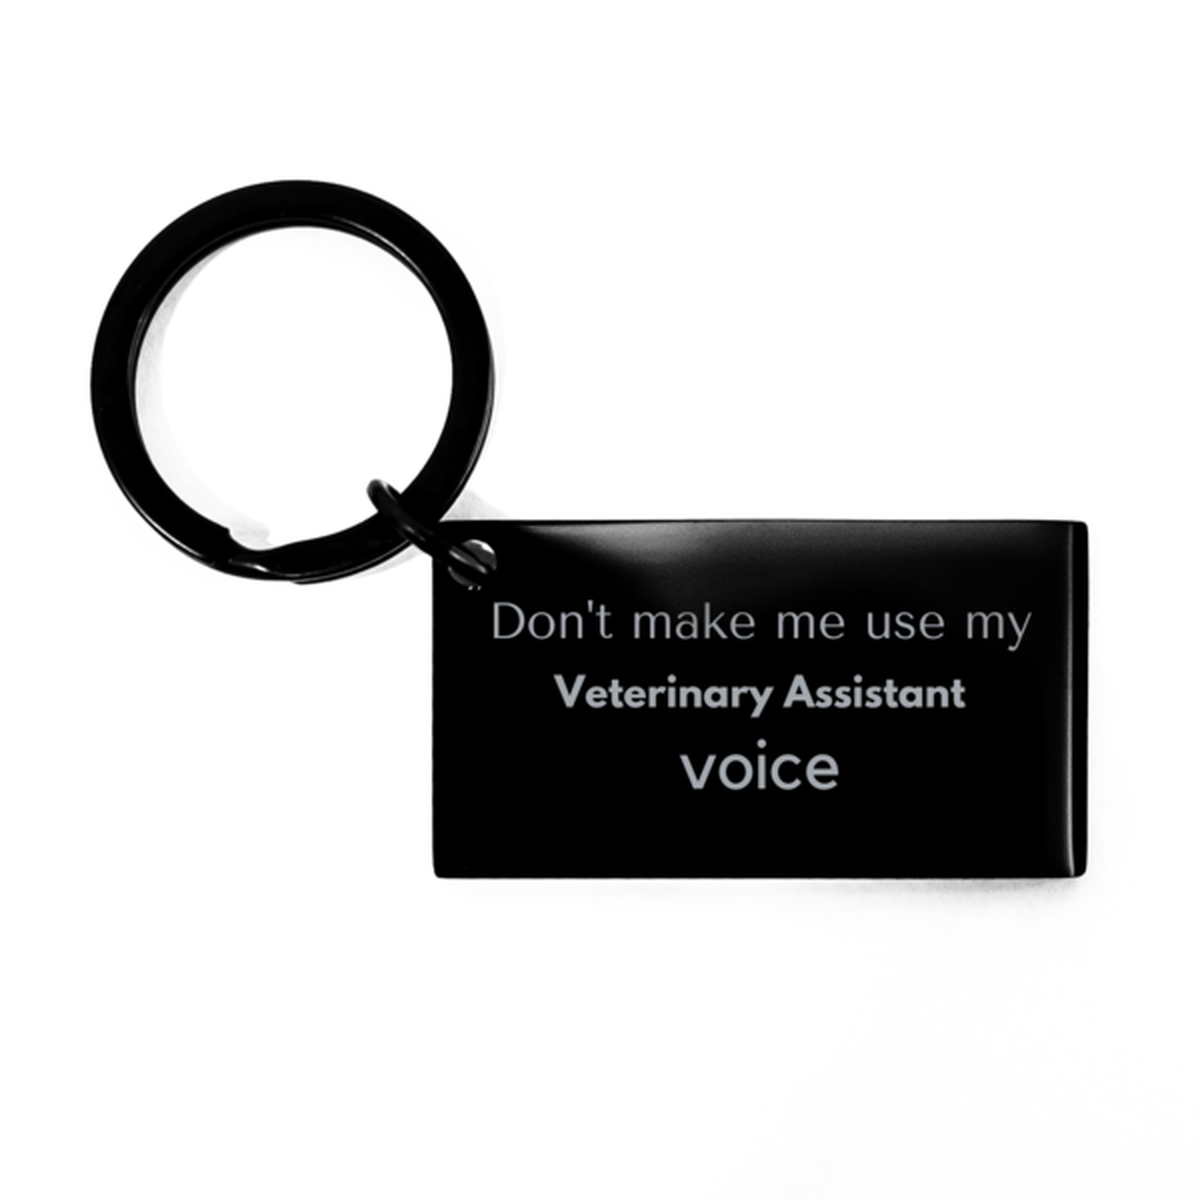 Don't make me use my Veterinary Assistant voice, Sarcasm Veterinary Assistant Gifts, Christmas Veterinary Assistant Keychain Birthday Unique Gifts For Veterinary Assistant Coworkers, Men, Women, Colleague, Friends